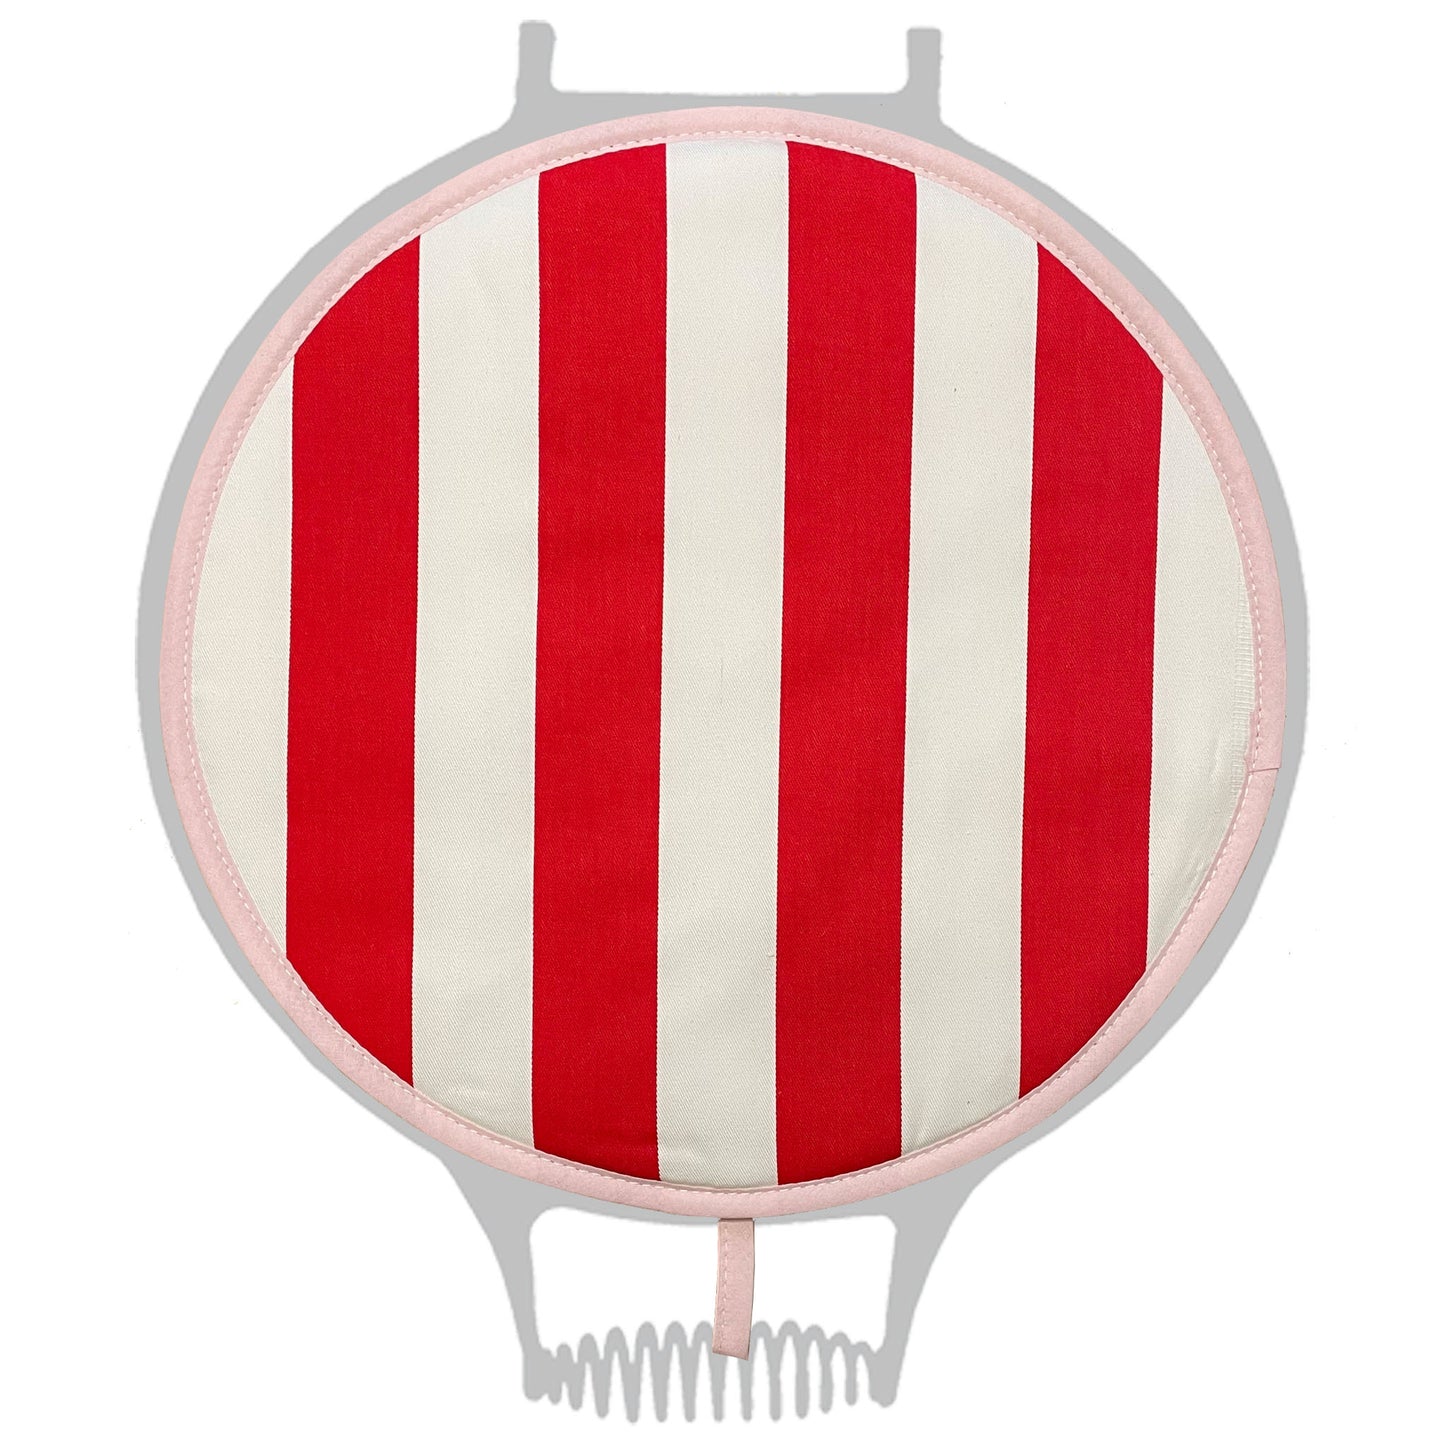 Red and White Wide Stripe Chefs Pad for use with Aga Range Cookers